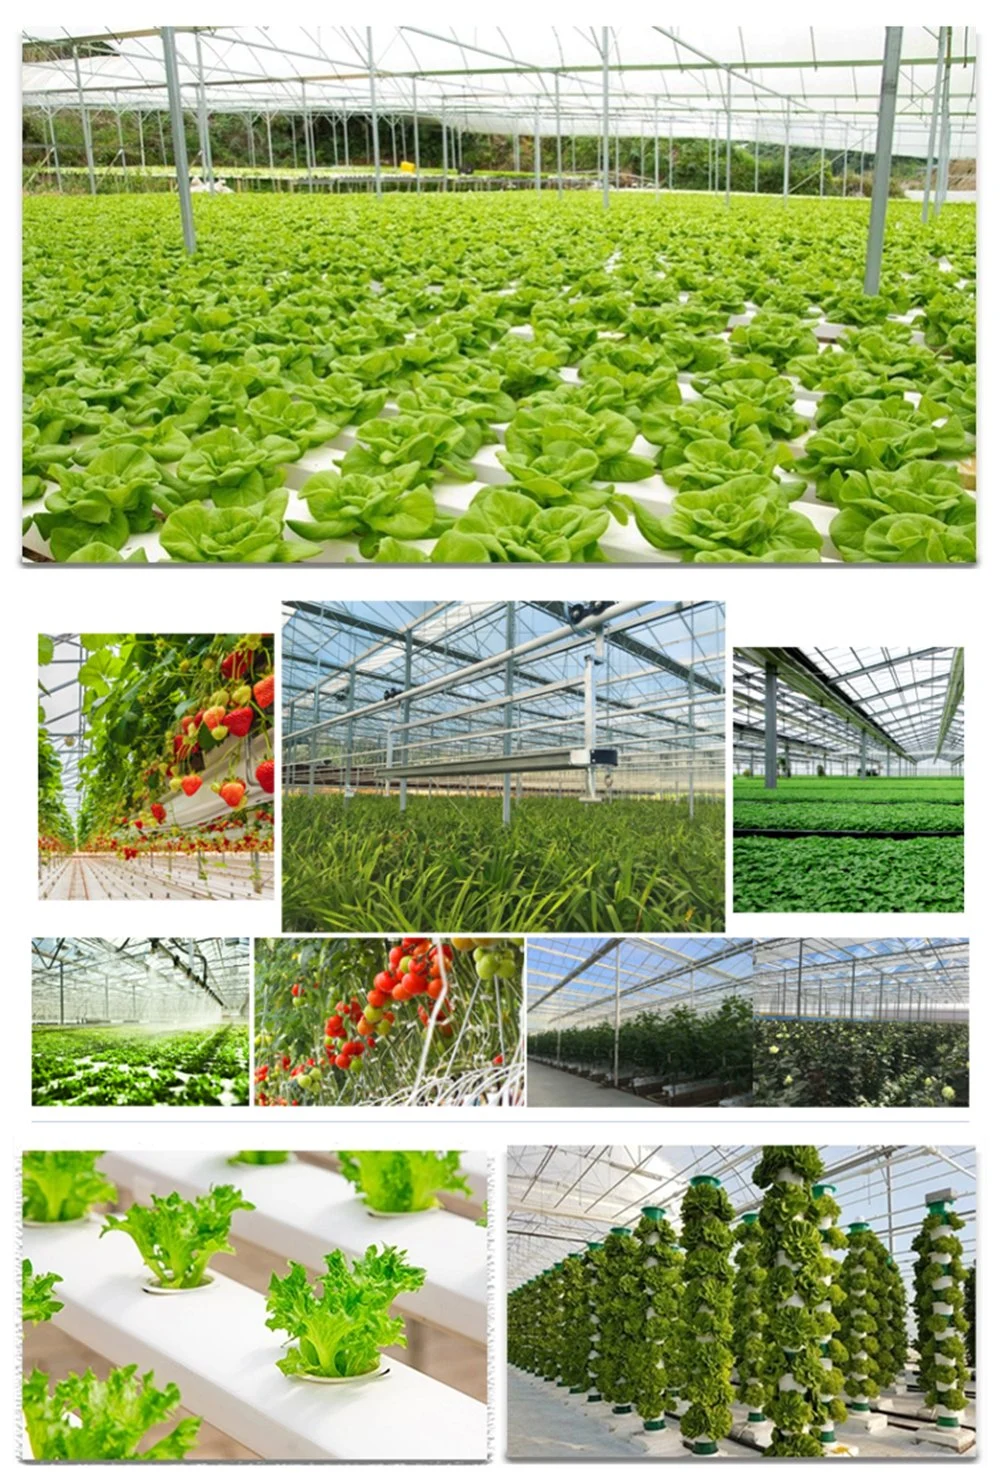 Venlo Agriculture Hydroponic Growing/Farming/Planting Multi-Span Glass Greenhouse for Vegetables/Flowers/Tomato/Cucumber